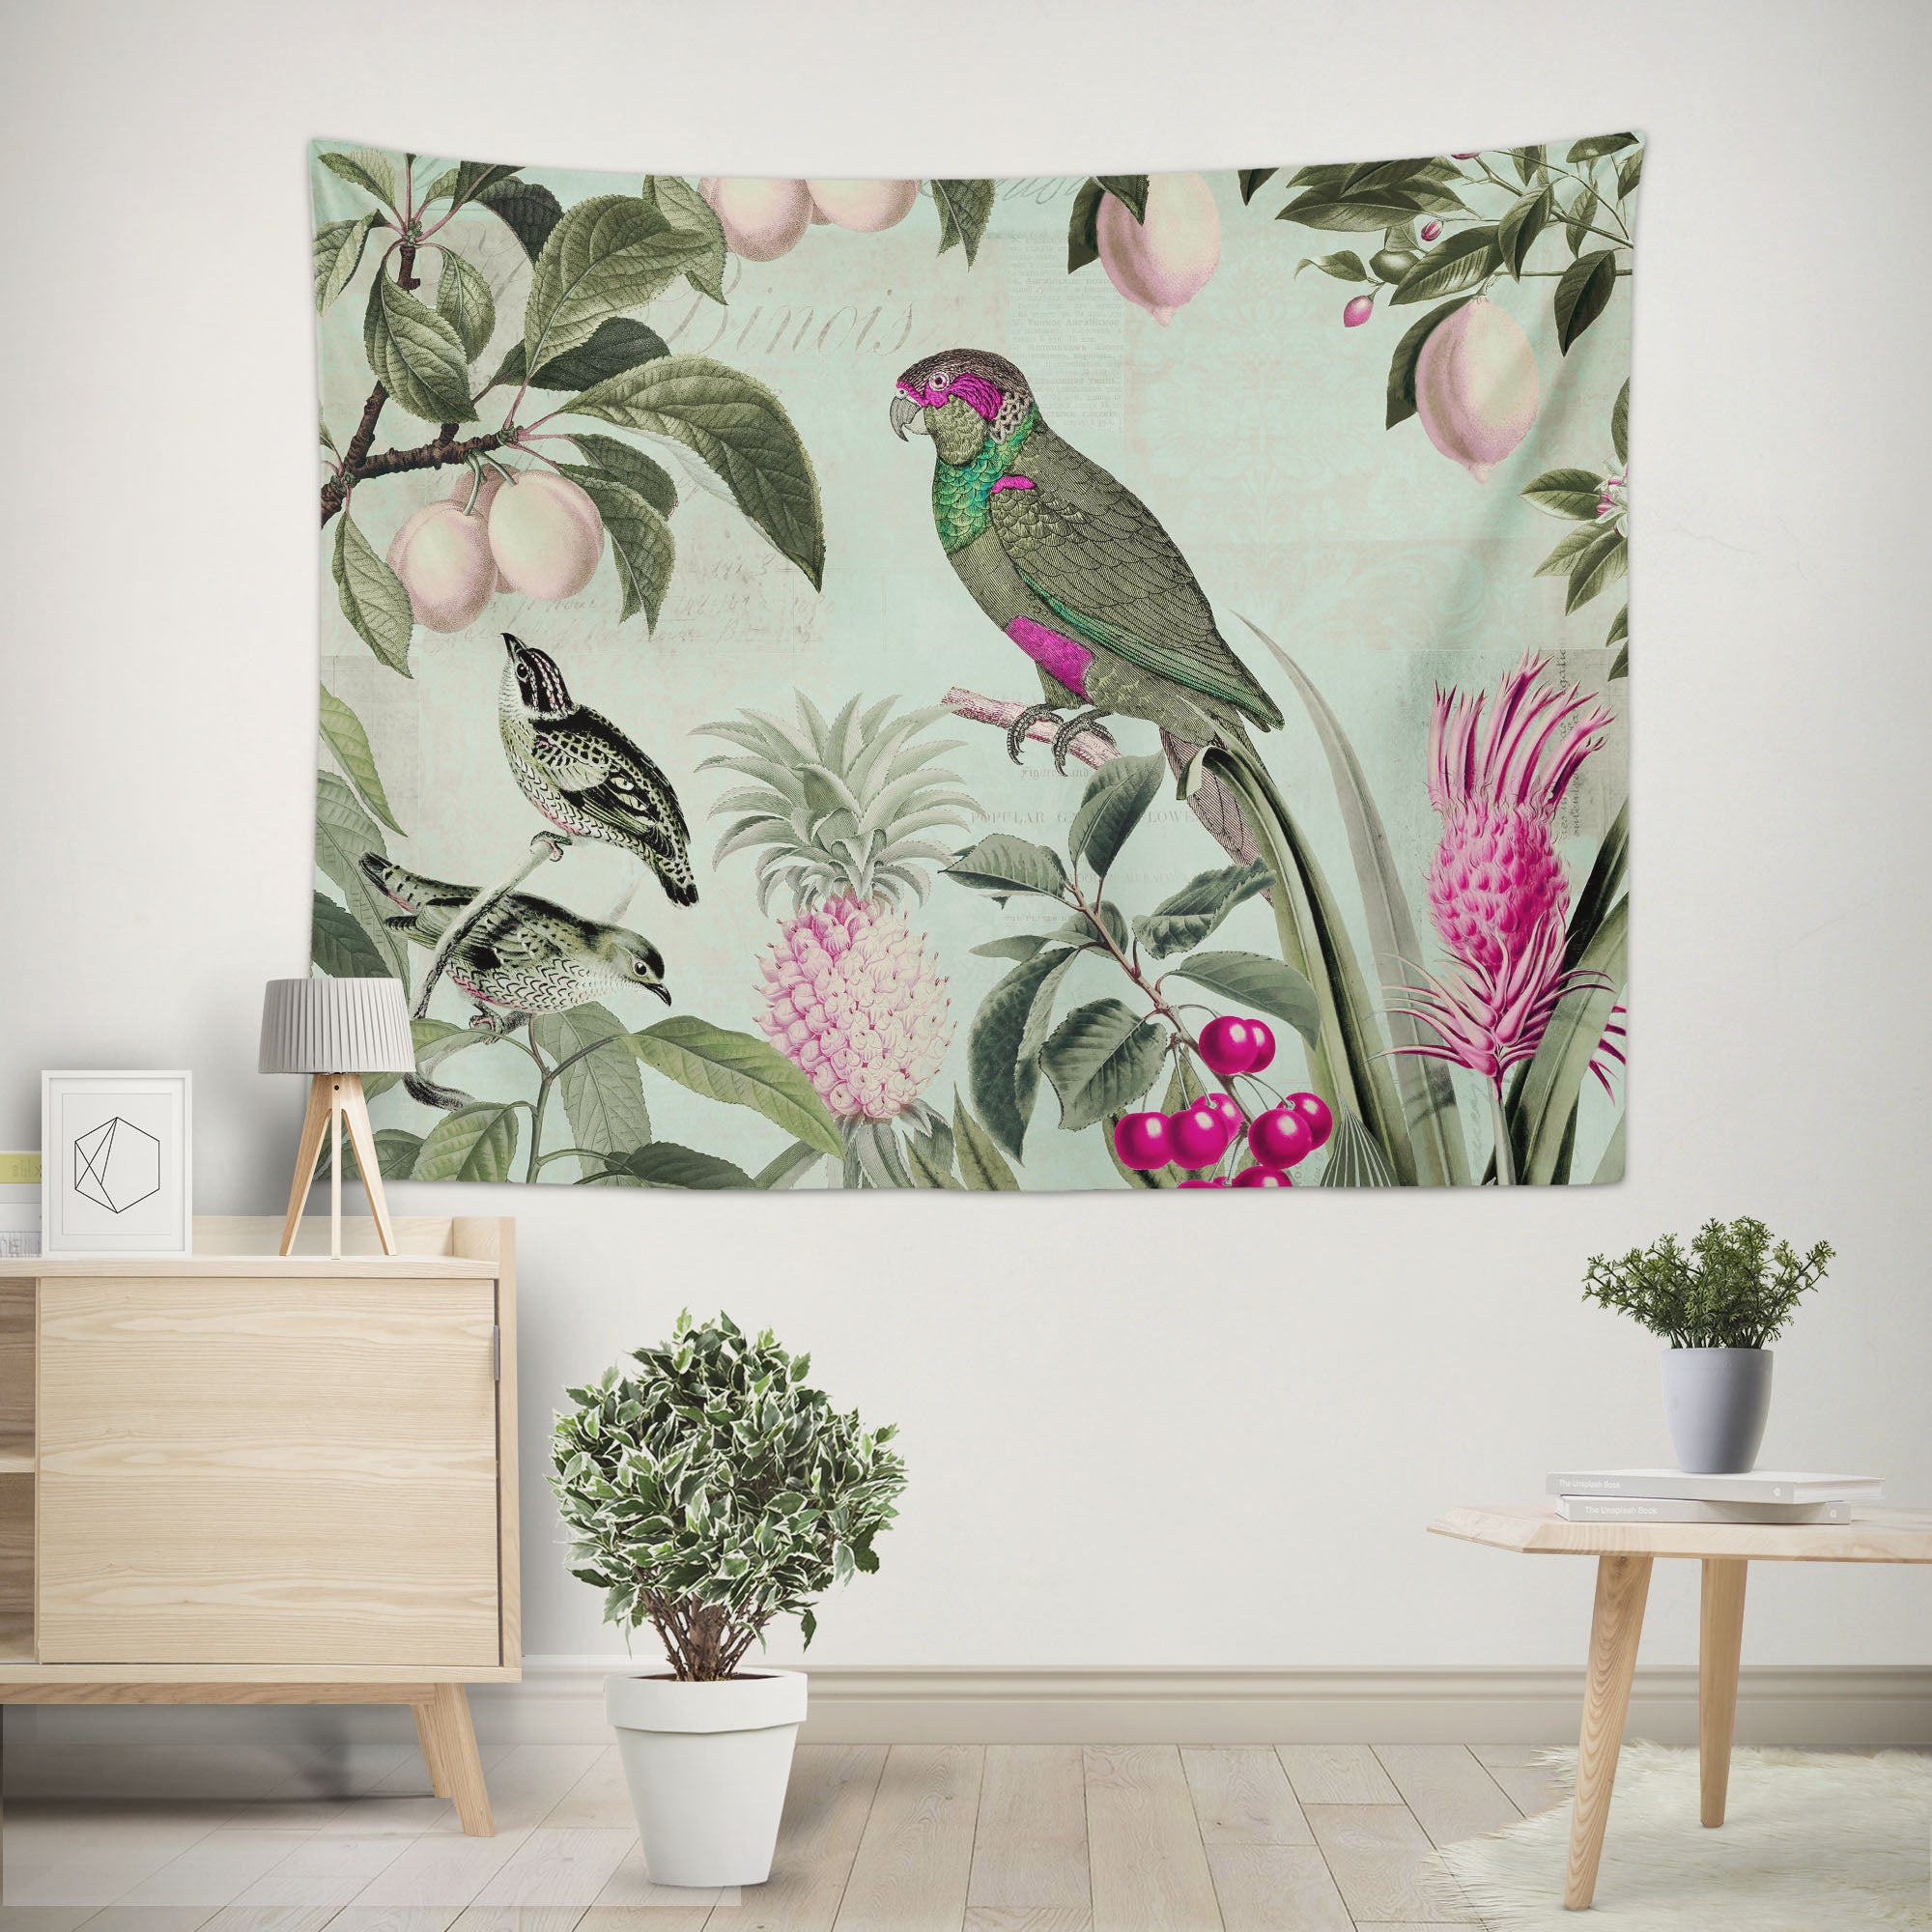 3D Parrot Lemon Pineapple 11847 Andrea haase Tapestry Hanging Cloth Hang